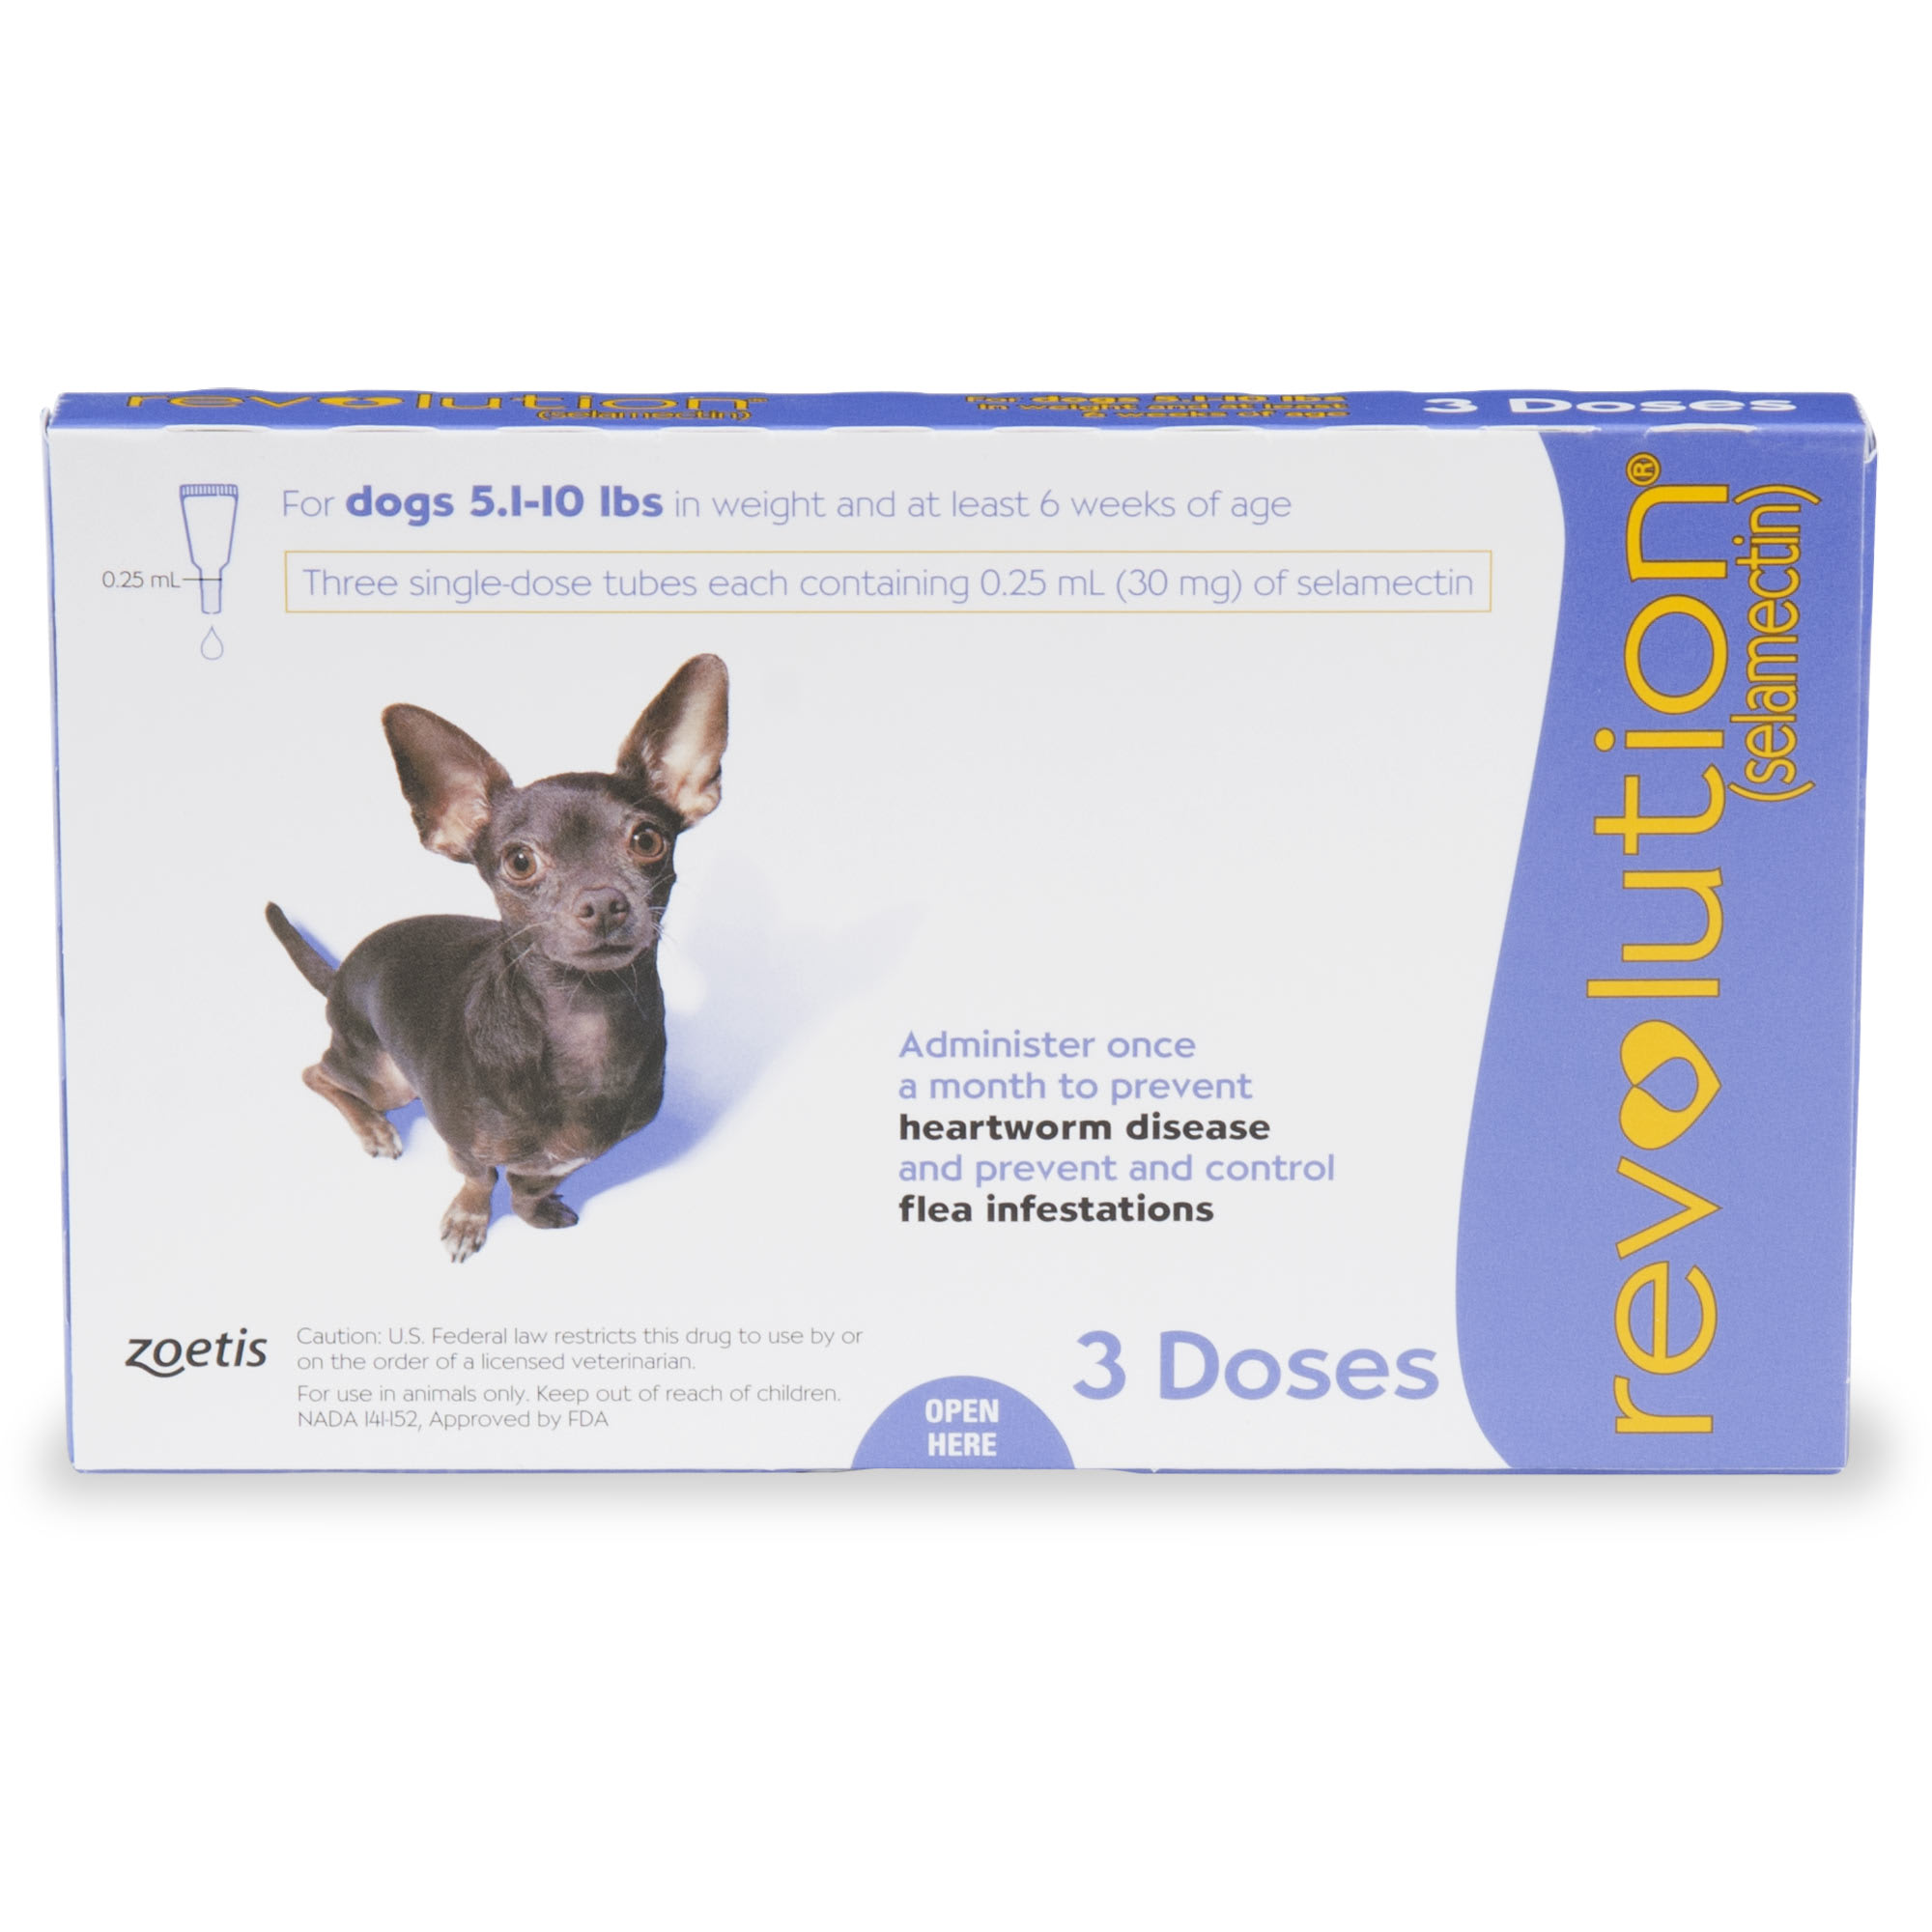 Photos - Dog Medicines & Vitamins Revolution Topical Solution for Dogs 5.1-10 lbs, 3 Month Supply 